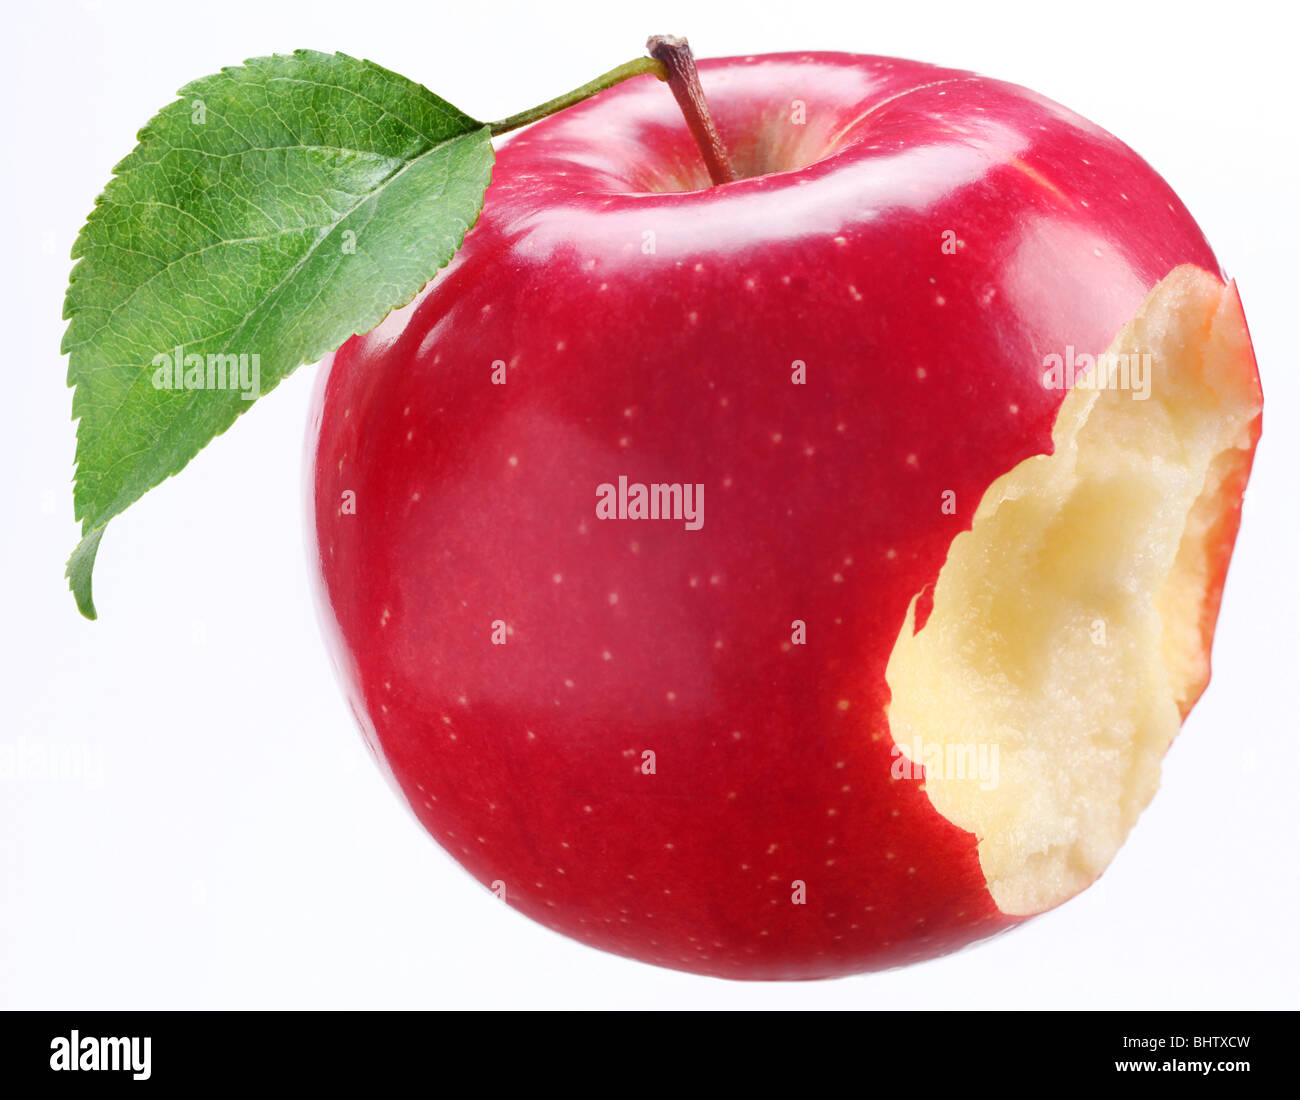 Bitten red apple on a white background Stock Photo